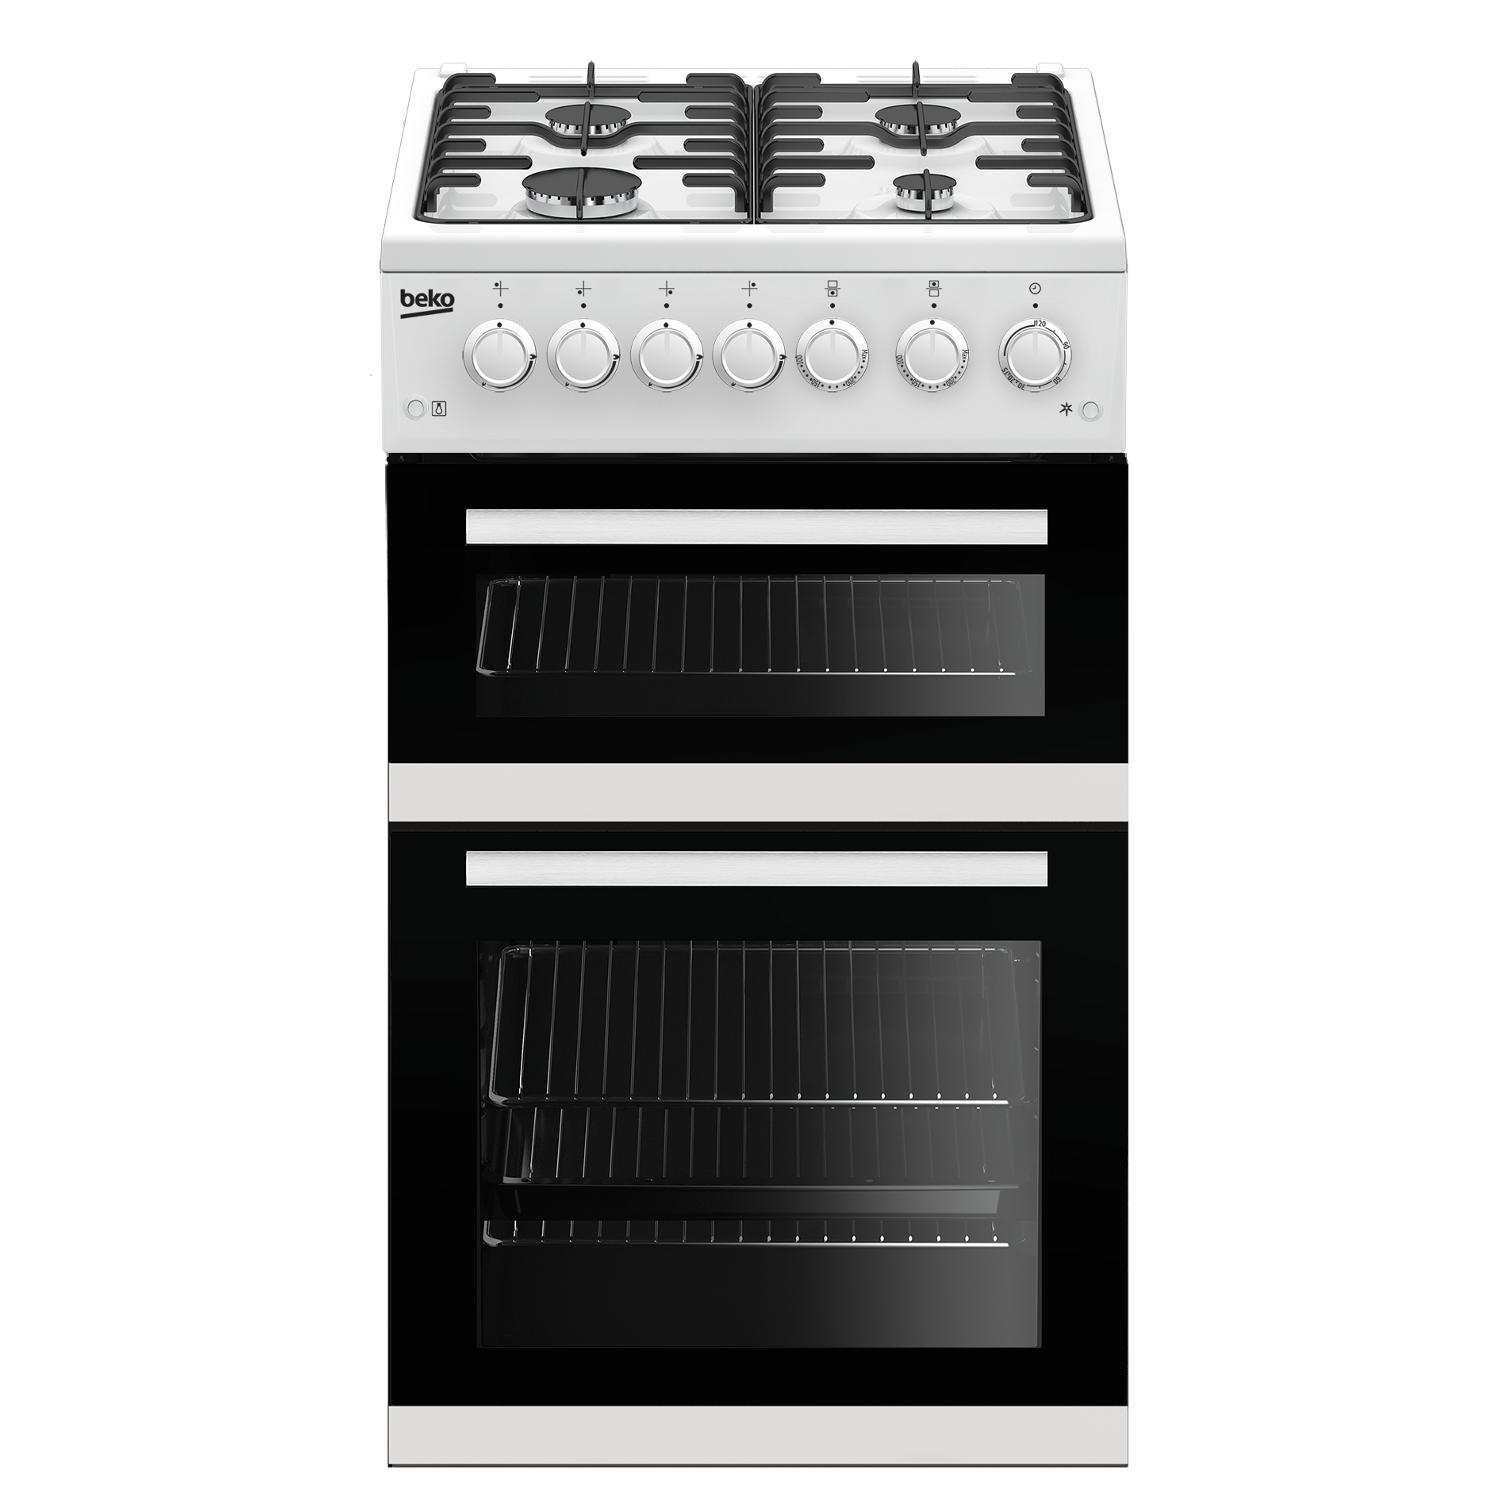 Beko 50cm Gas Cooker with Glass lid  - 9